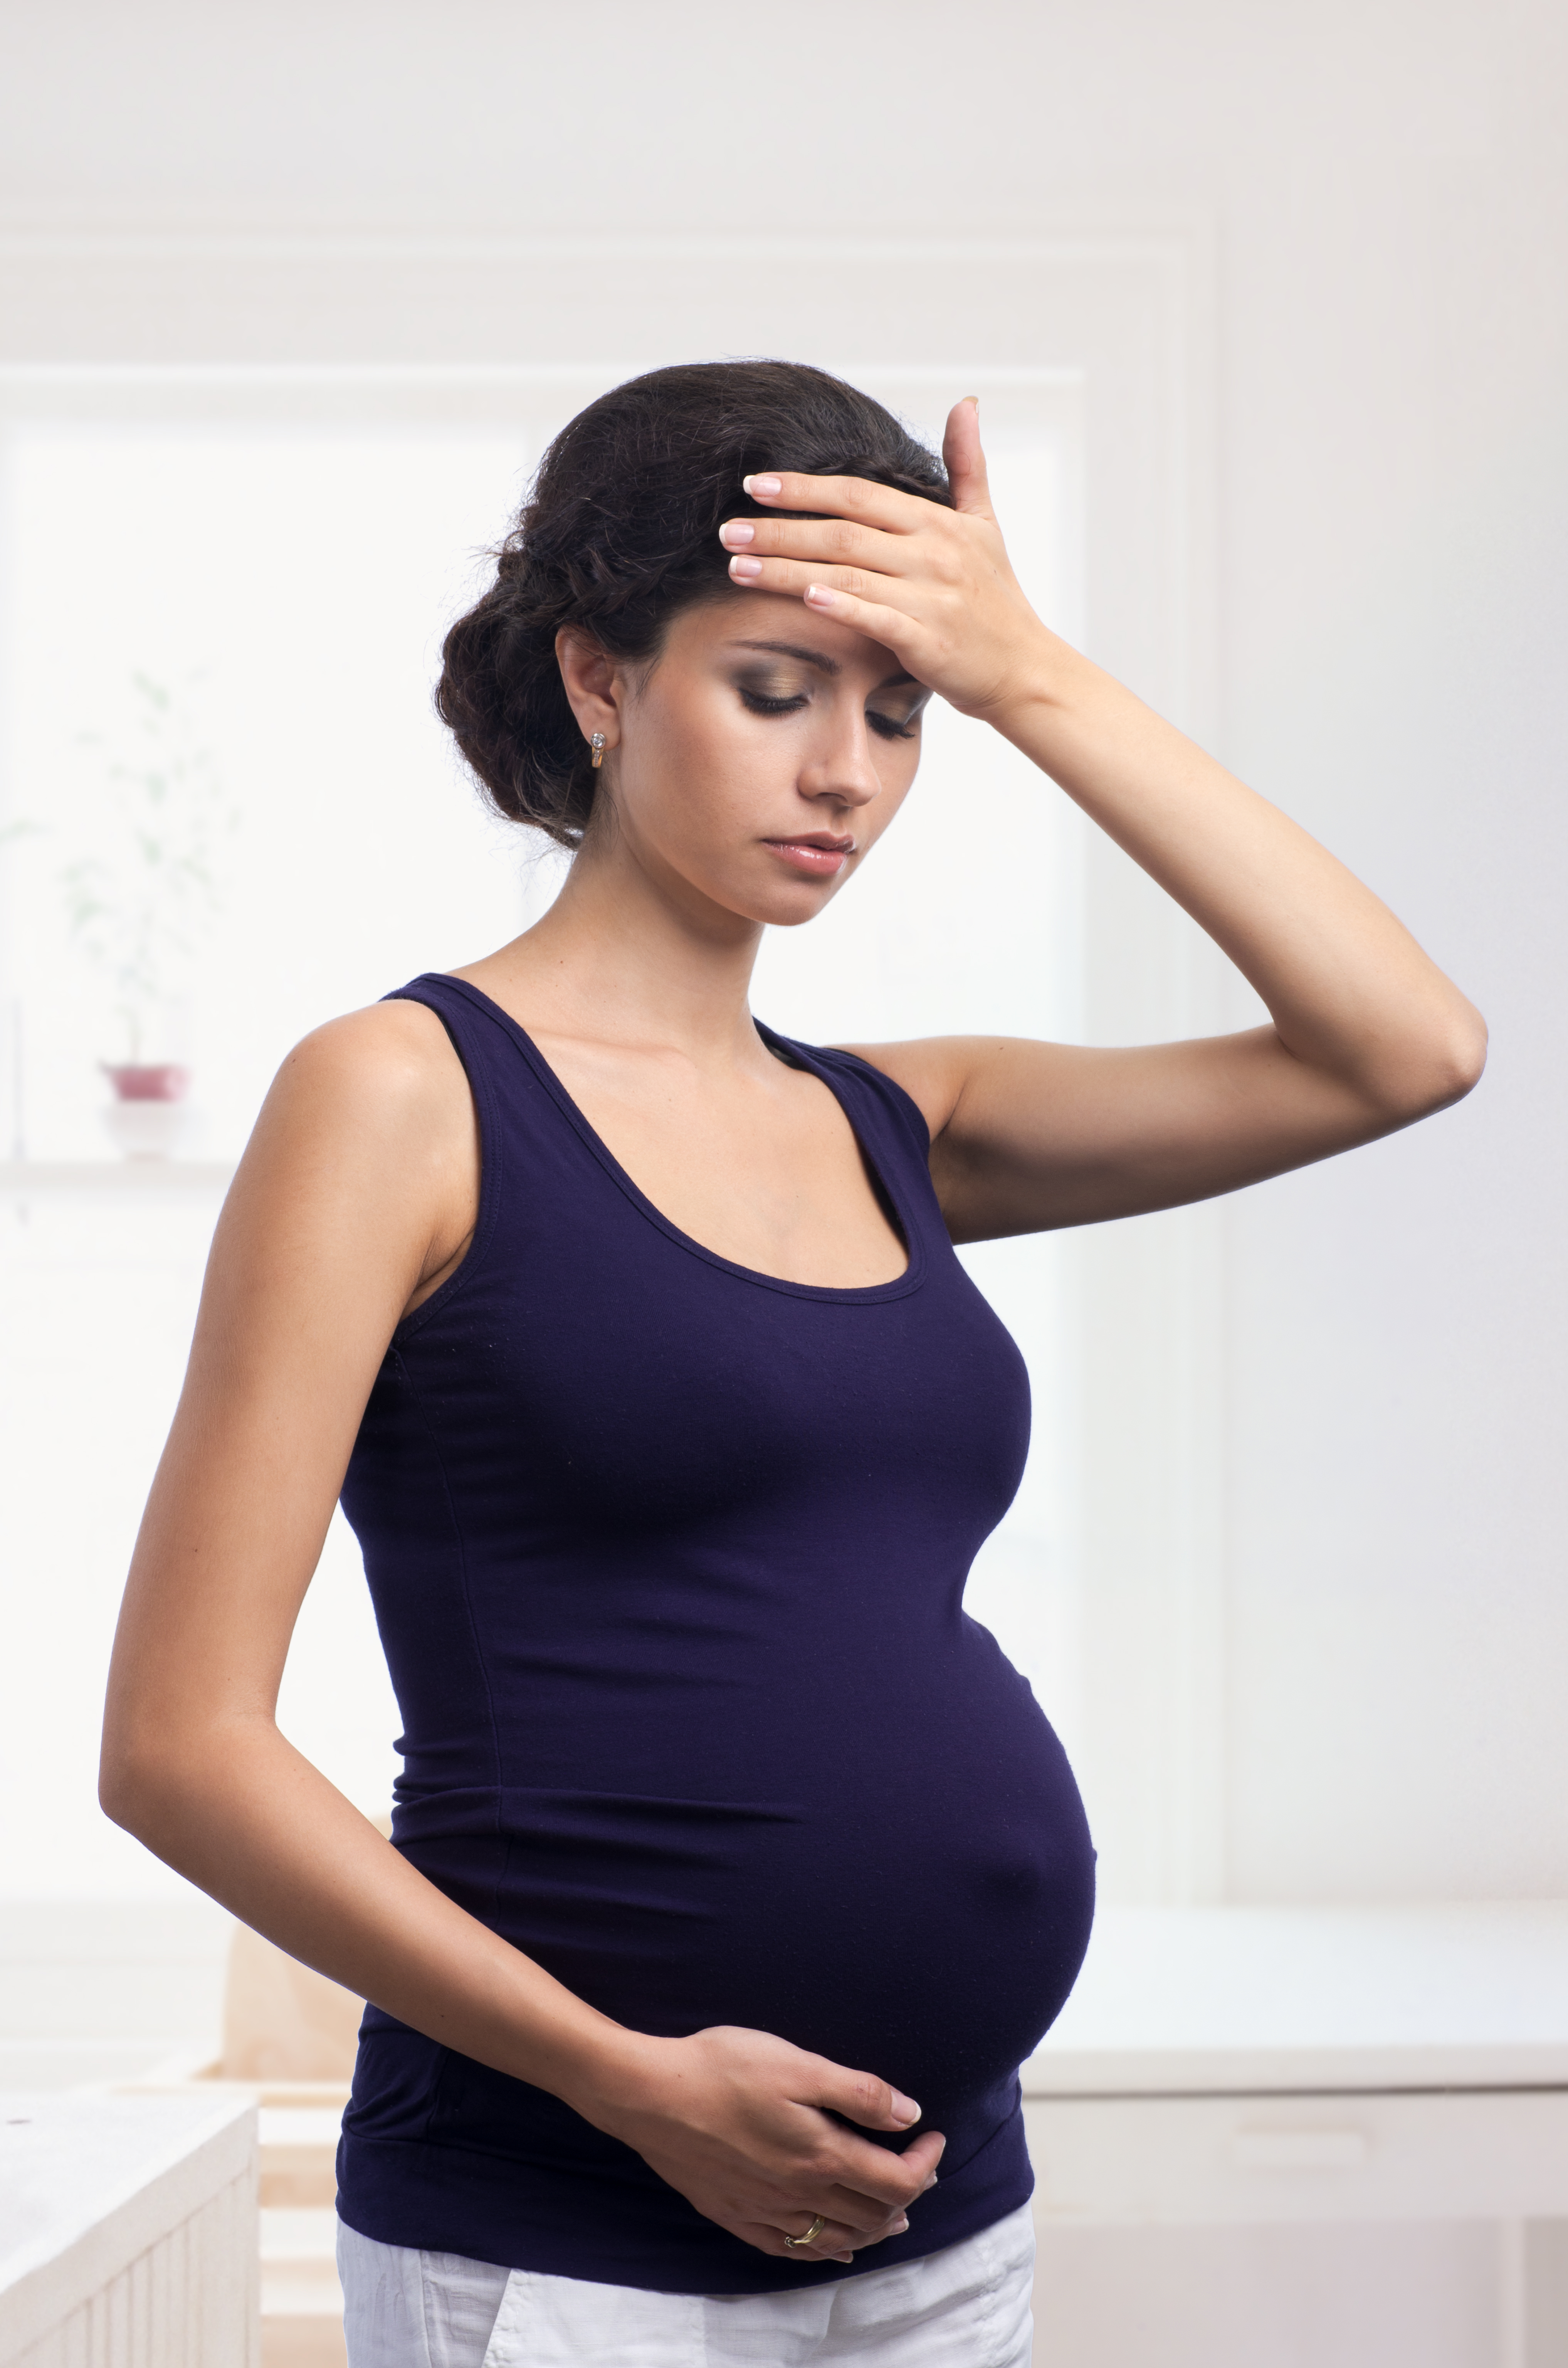 Fever In Pregnant Woman 65